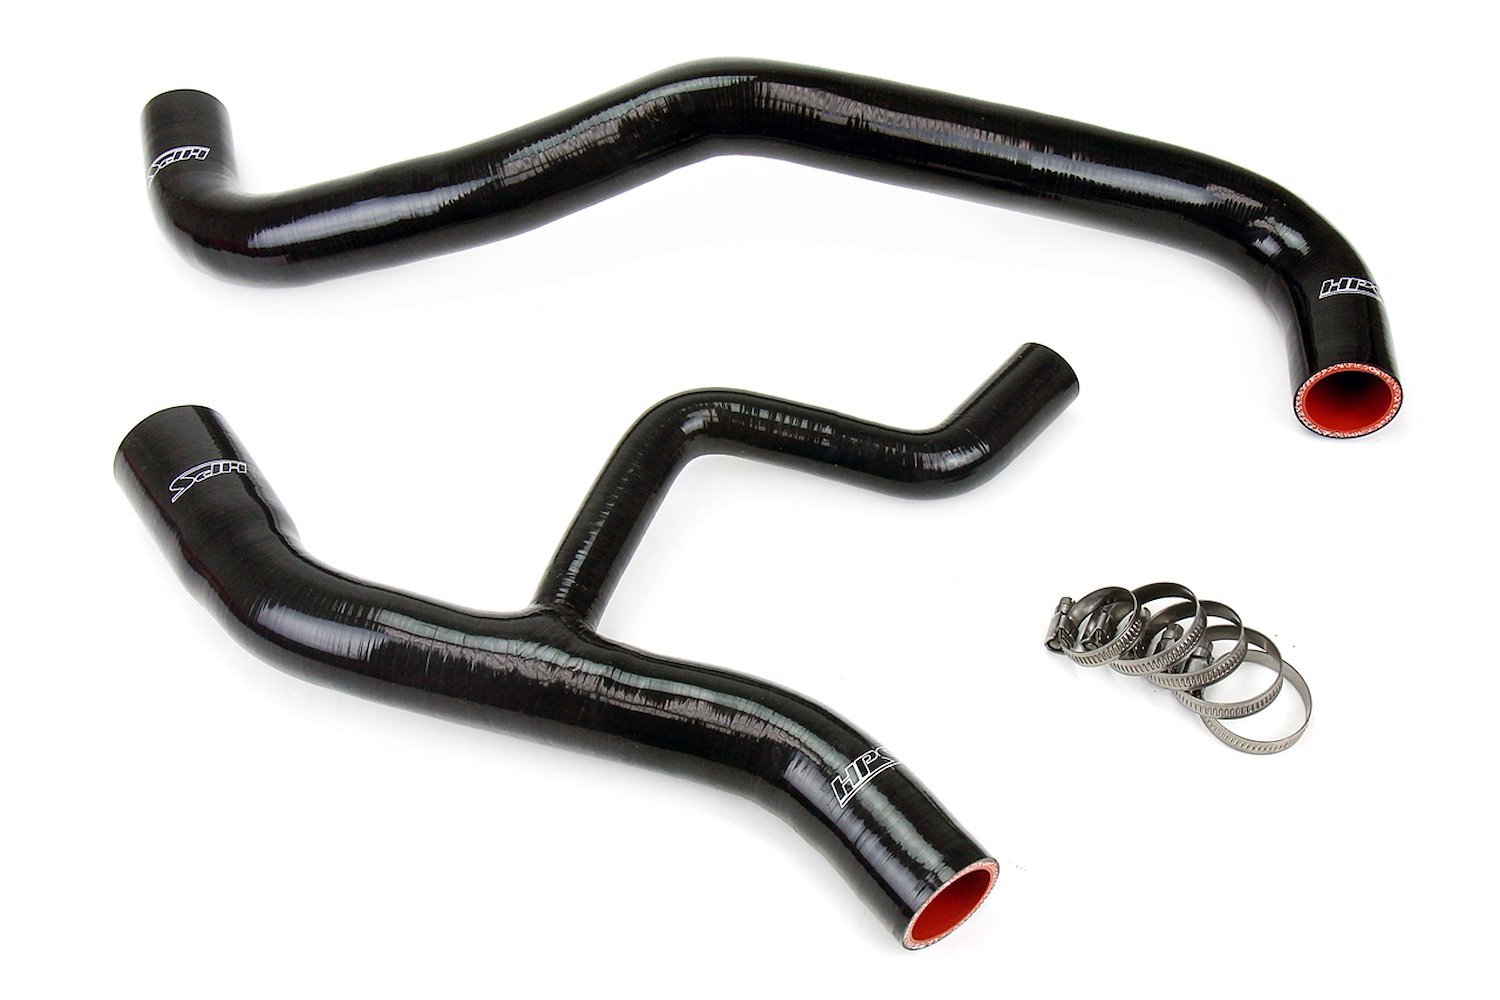 57-1012-BLK Radiator Hose Kit, High-Temp 3-Ply Reinforced Silicone, Replace OEM Rubber Radiator Coolant Hoses